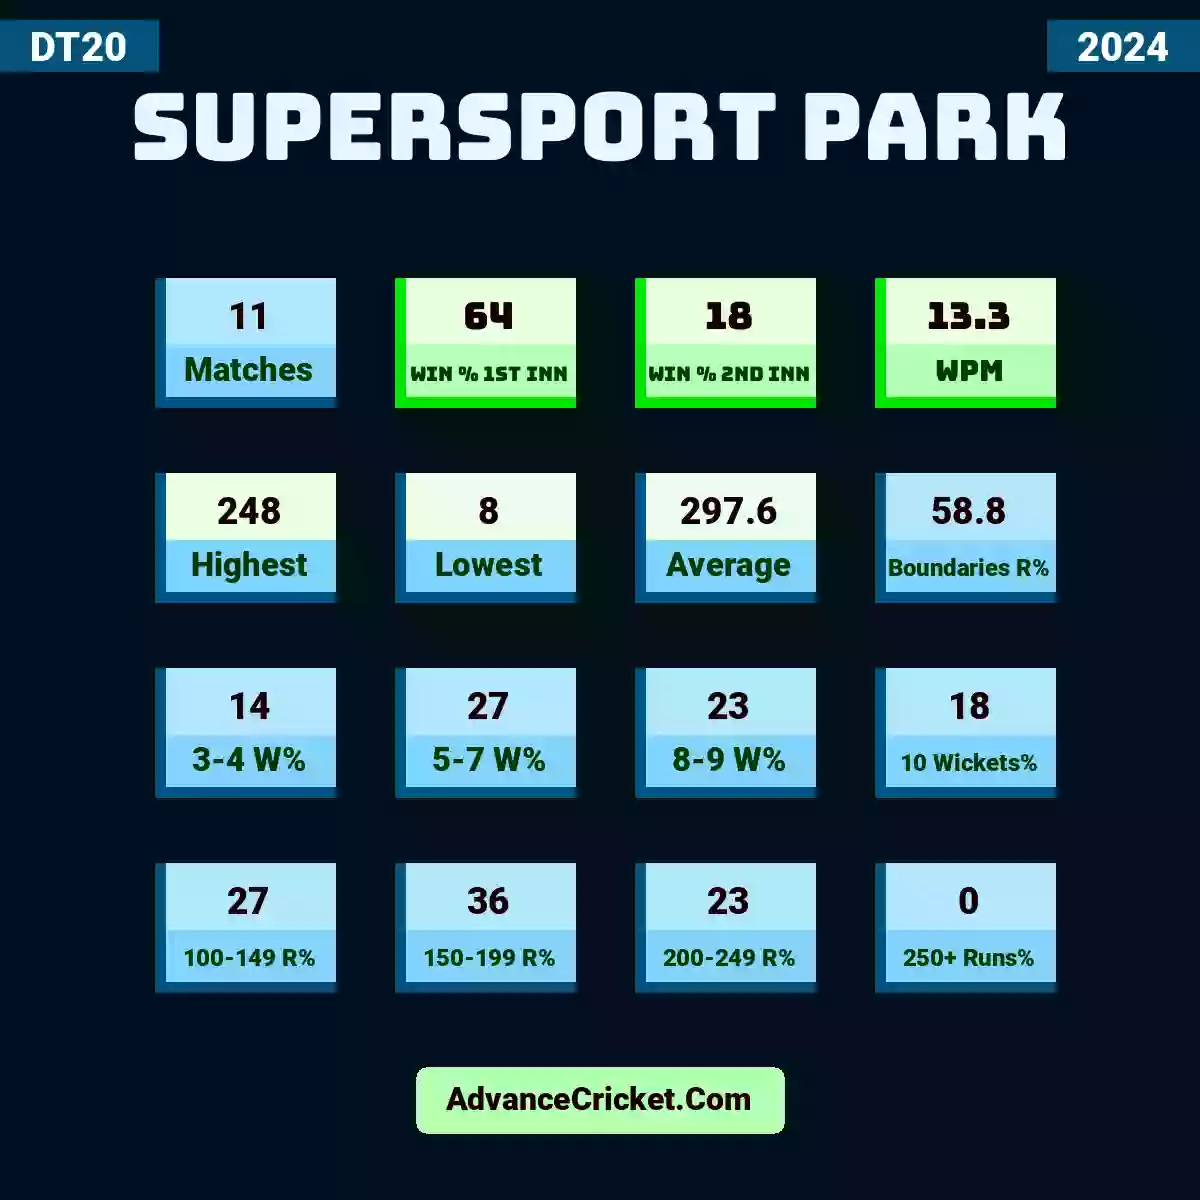 Image showing SuperSport Park DT20 2024 with Matches: 11, Win % 1st Inn: 64, Win % 2nd Inn: 18, WPM: 13.3, Highest: 248, Lowest: 8, Average: 297.6, Boundaries R%: 58.8, 3-4 W%: 14, 5-7 W%: 27, 8-9 W%: 23, 10 Wickets%: 18, 100-149 R%: 27, 150-199 R%: 36, 200-249 R%: 23, 250+ Runs%: 0.